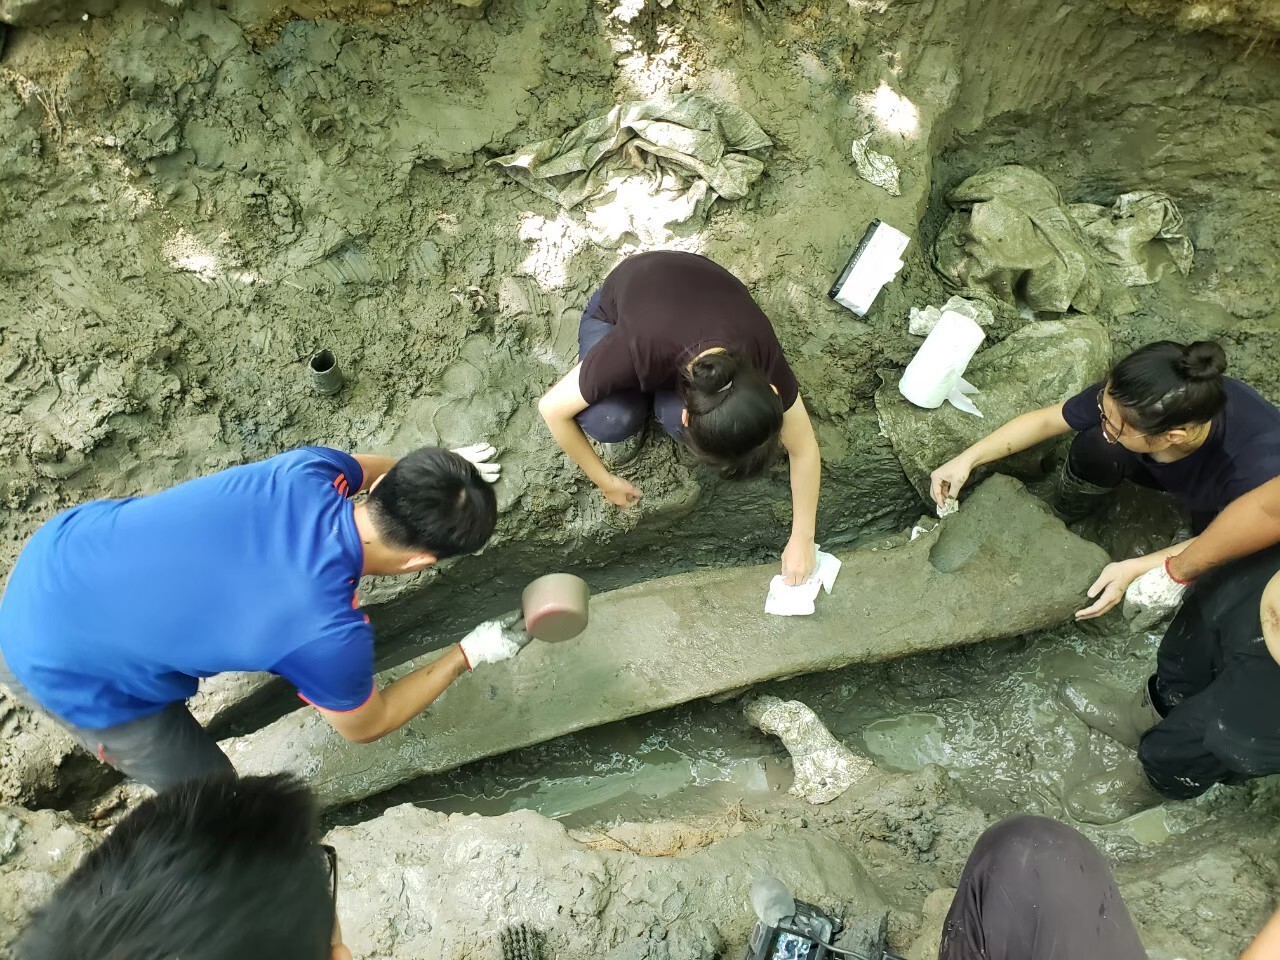 The excavation team carefully removed water and dirt from the lower jawbone fossil before jacketing it